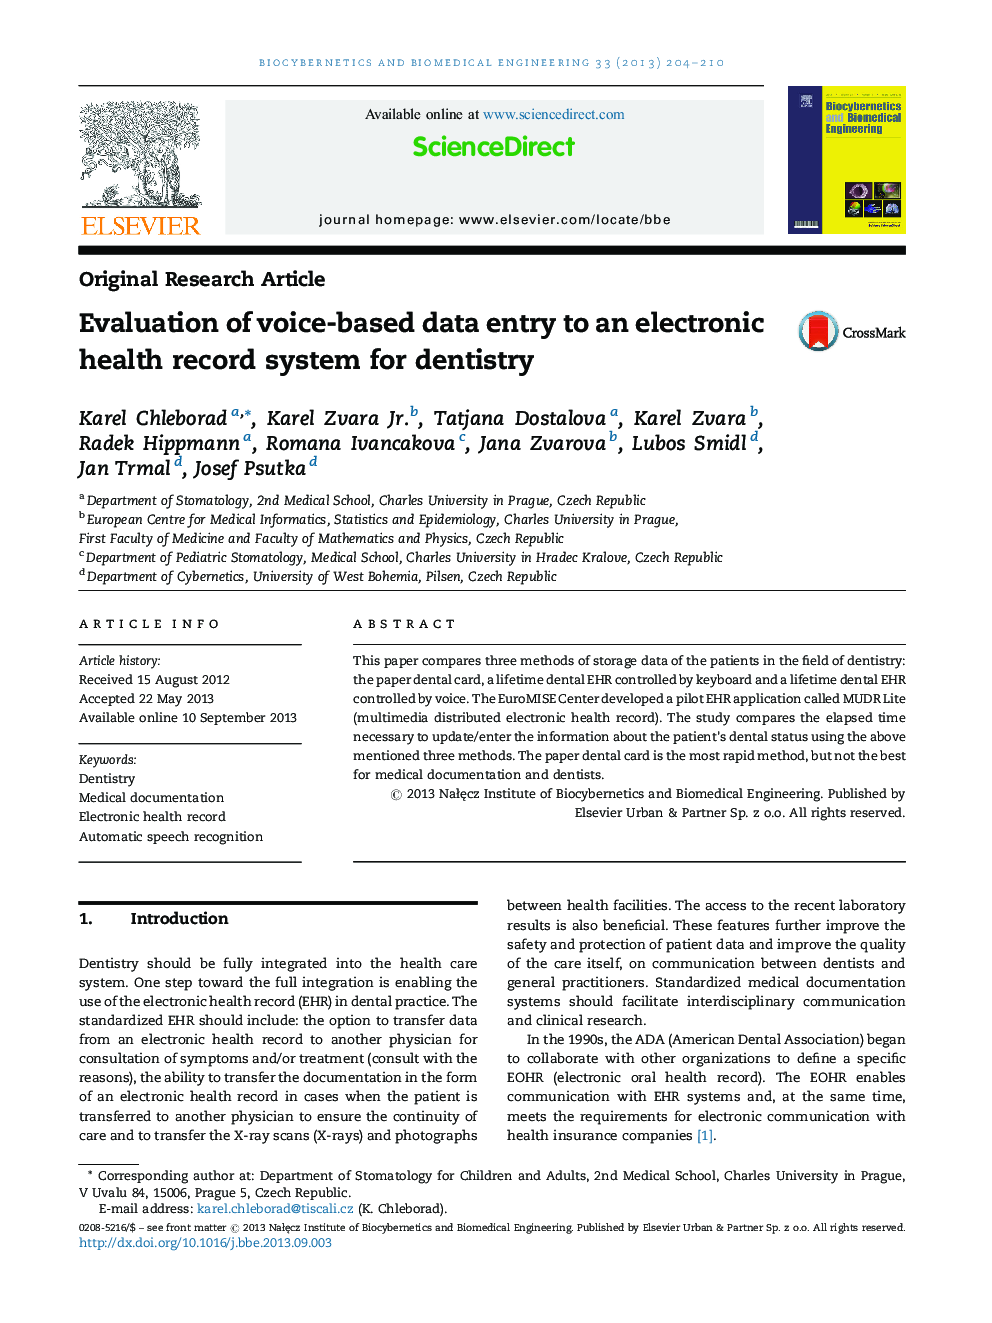 Evaluation of voice-based data entry to an electronic health record system for dentistry